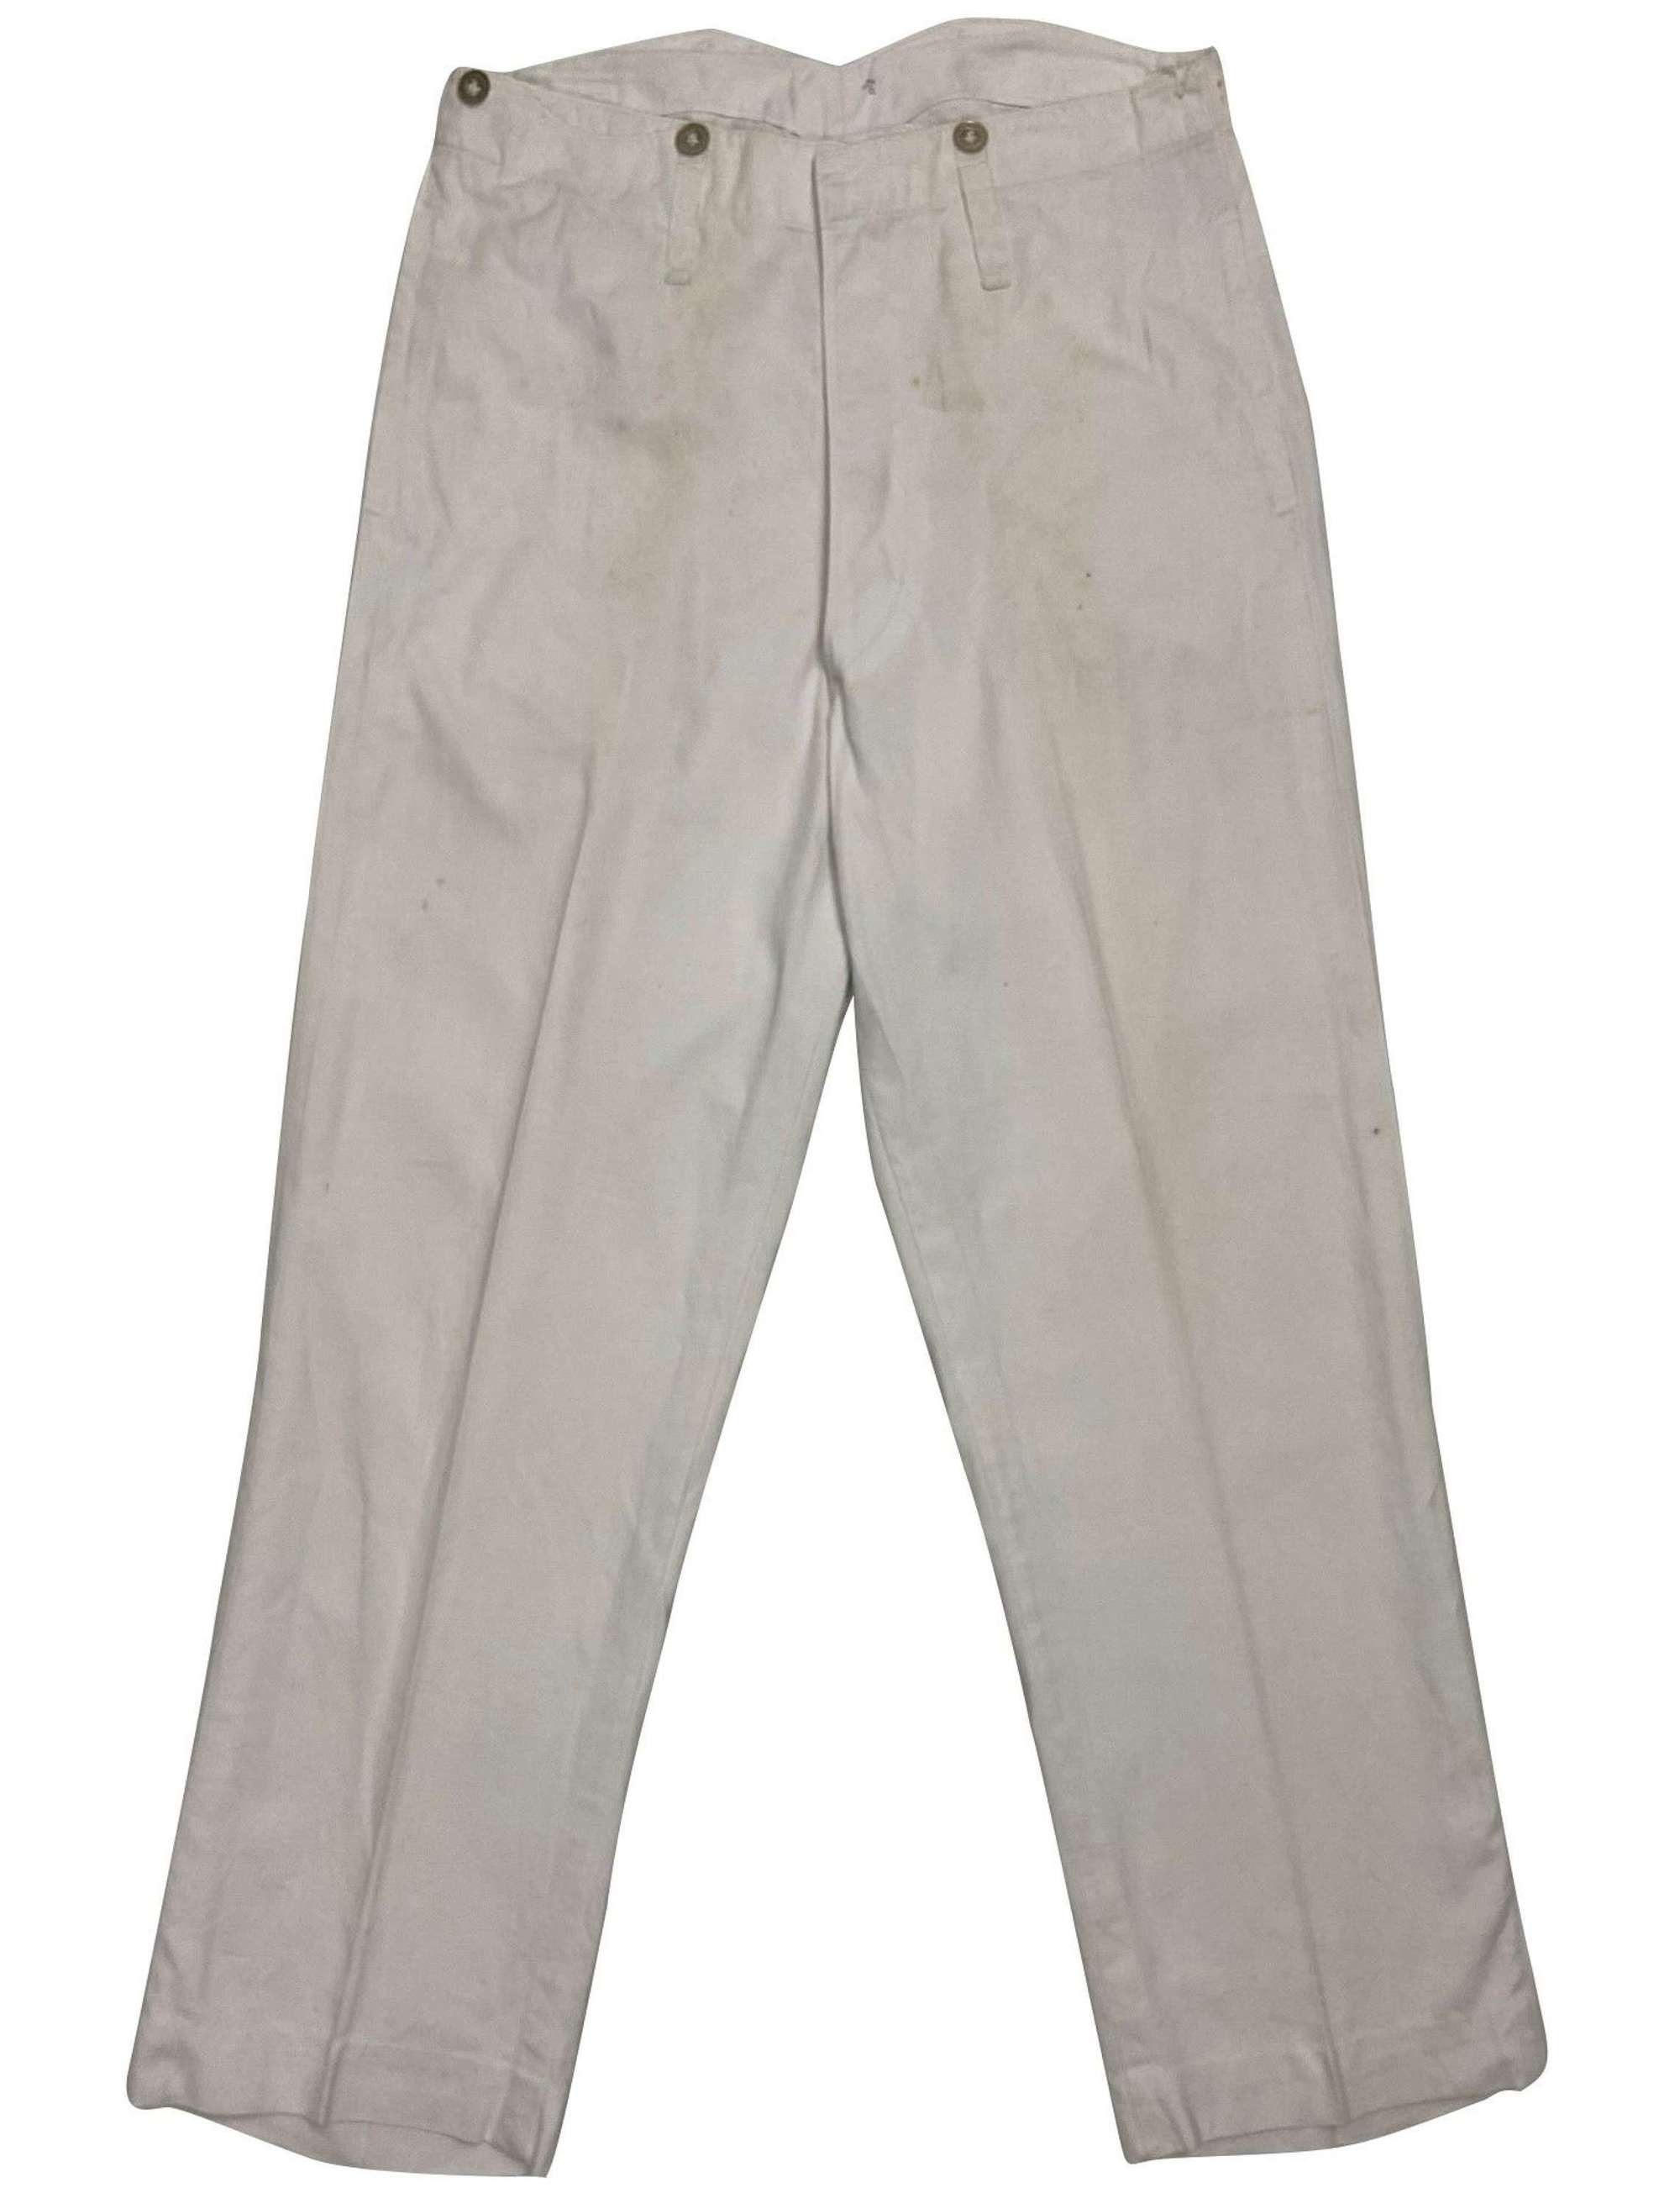 Original 1930s Royal Navy White Fatigue Work Trousers